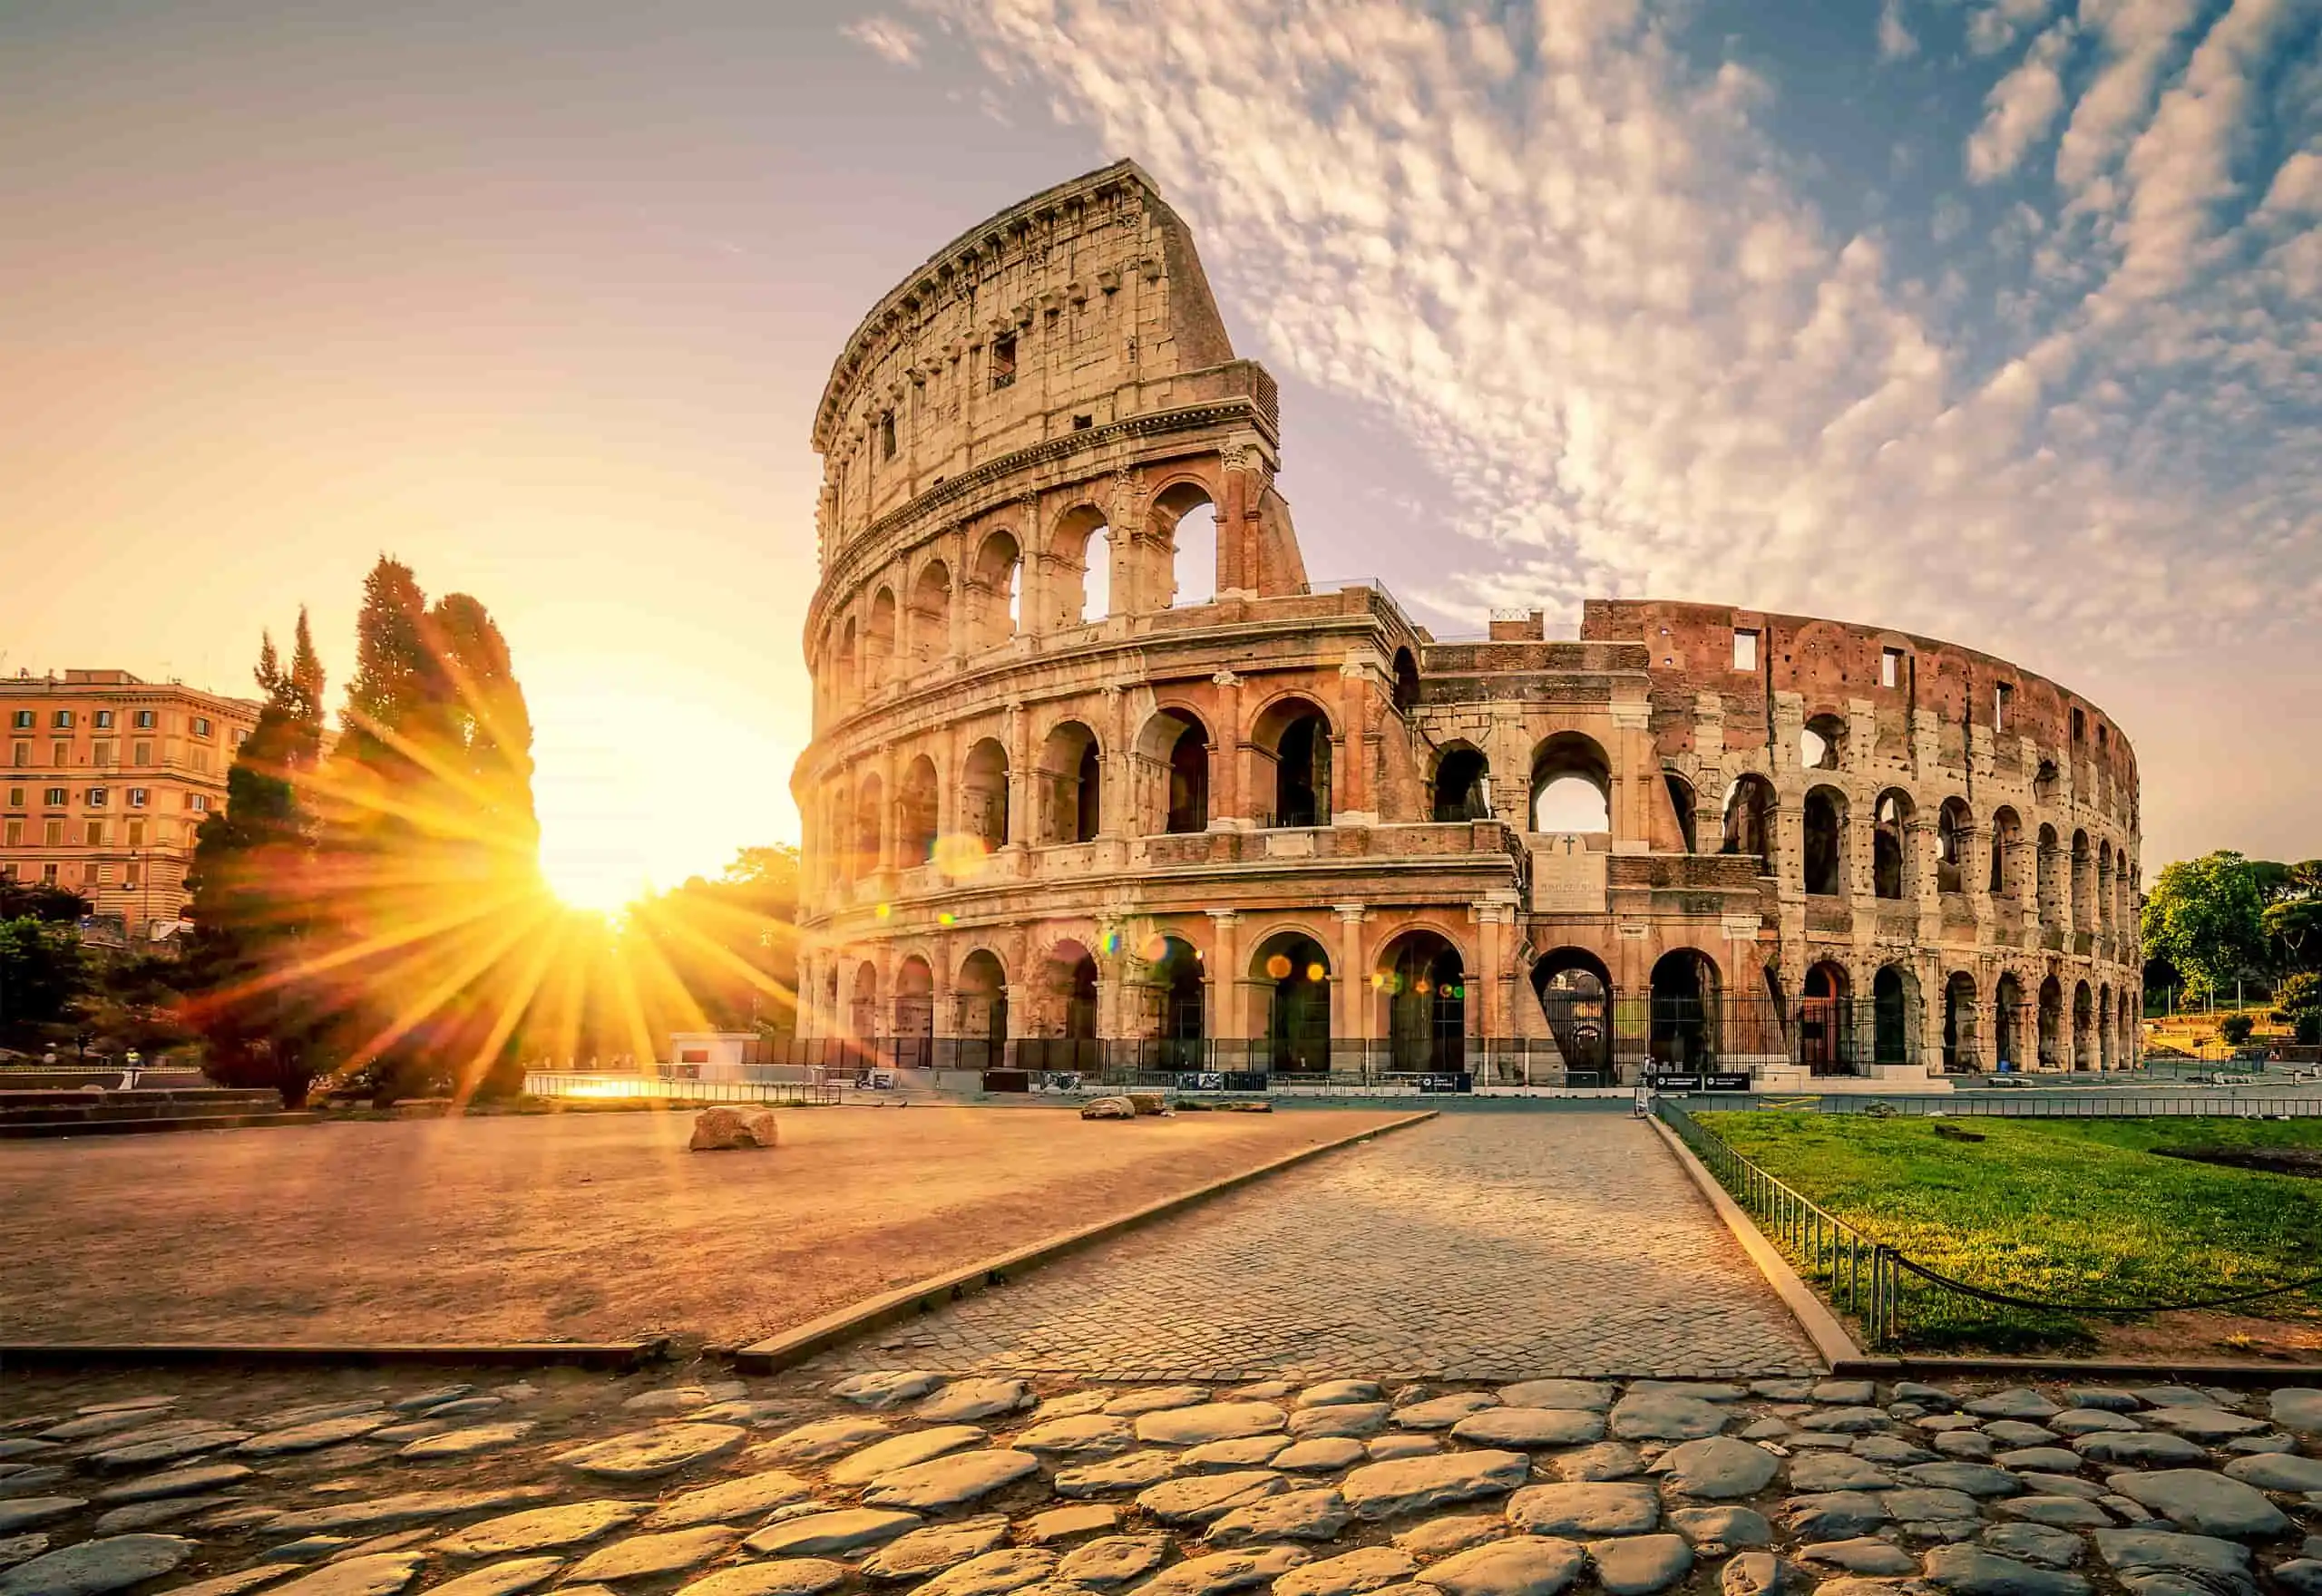 Human Resource Management Courses in Rome